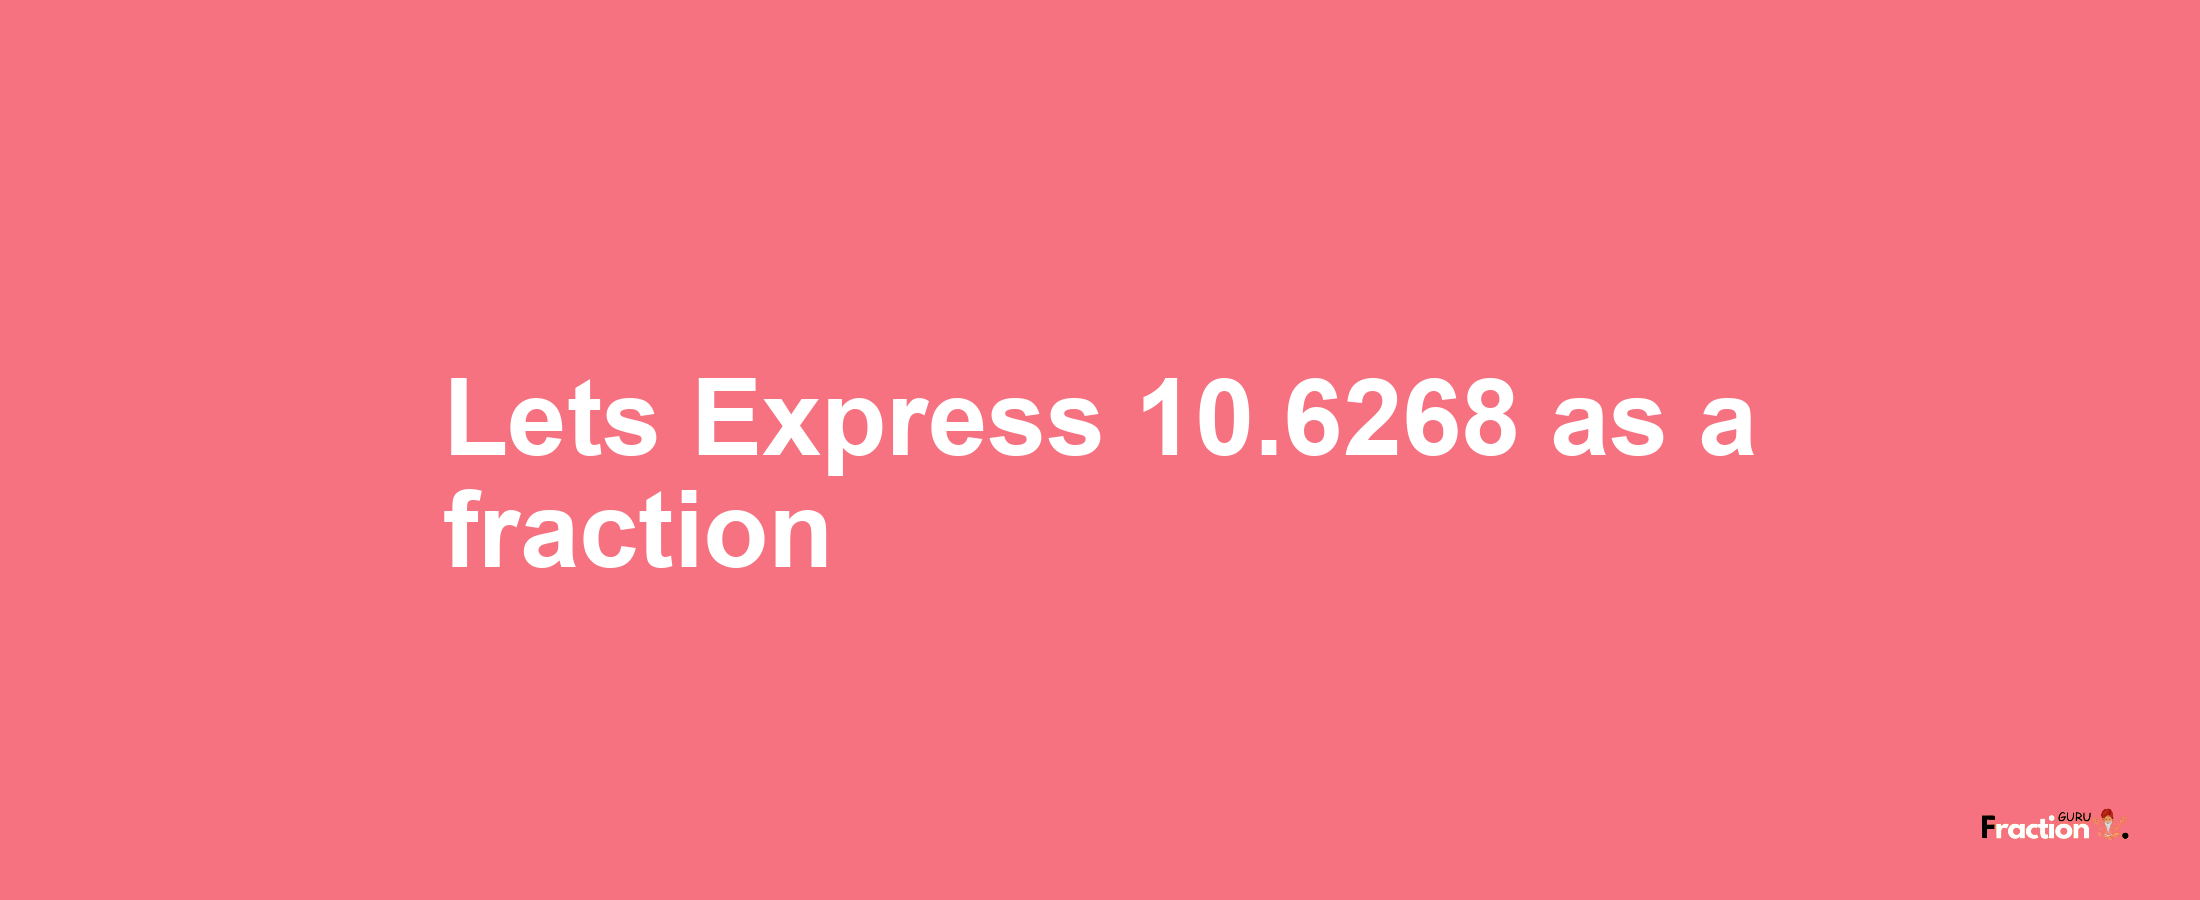 Lets Express 10.6268 as afraction